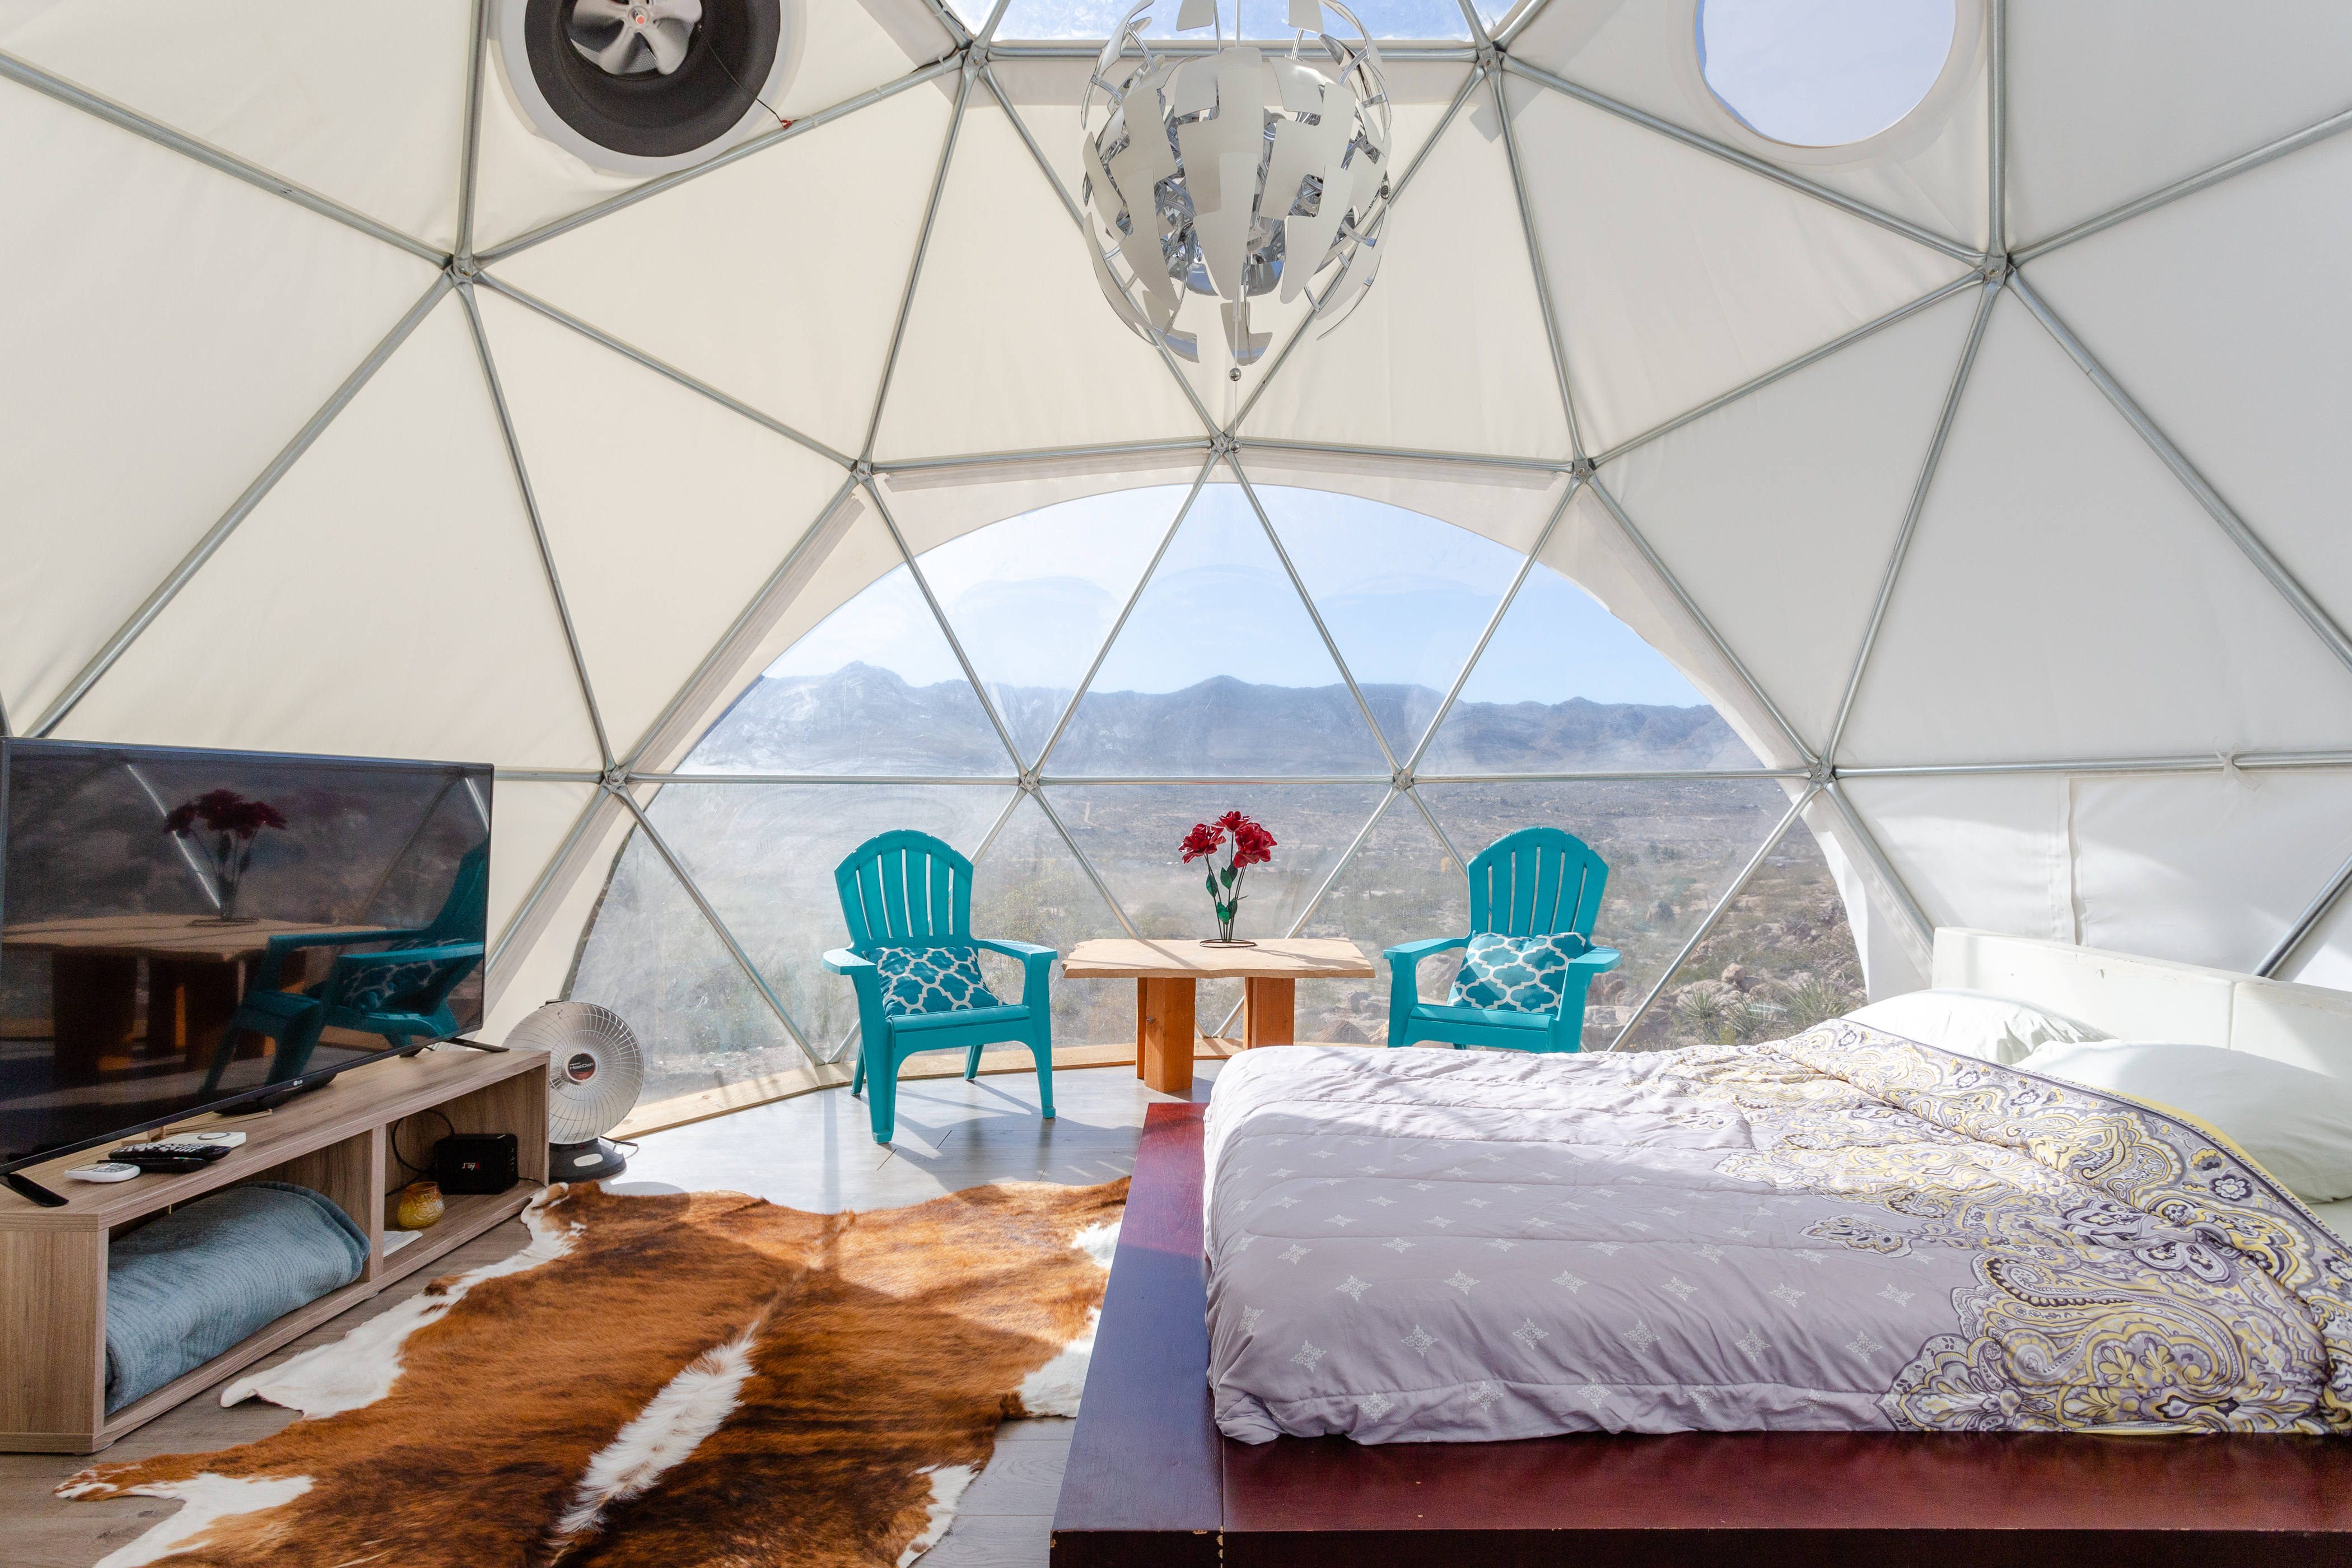 Dome Sweet Dome: Discover 10 Geodesic Stays for Stargazing